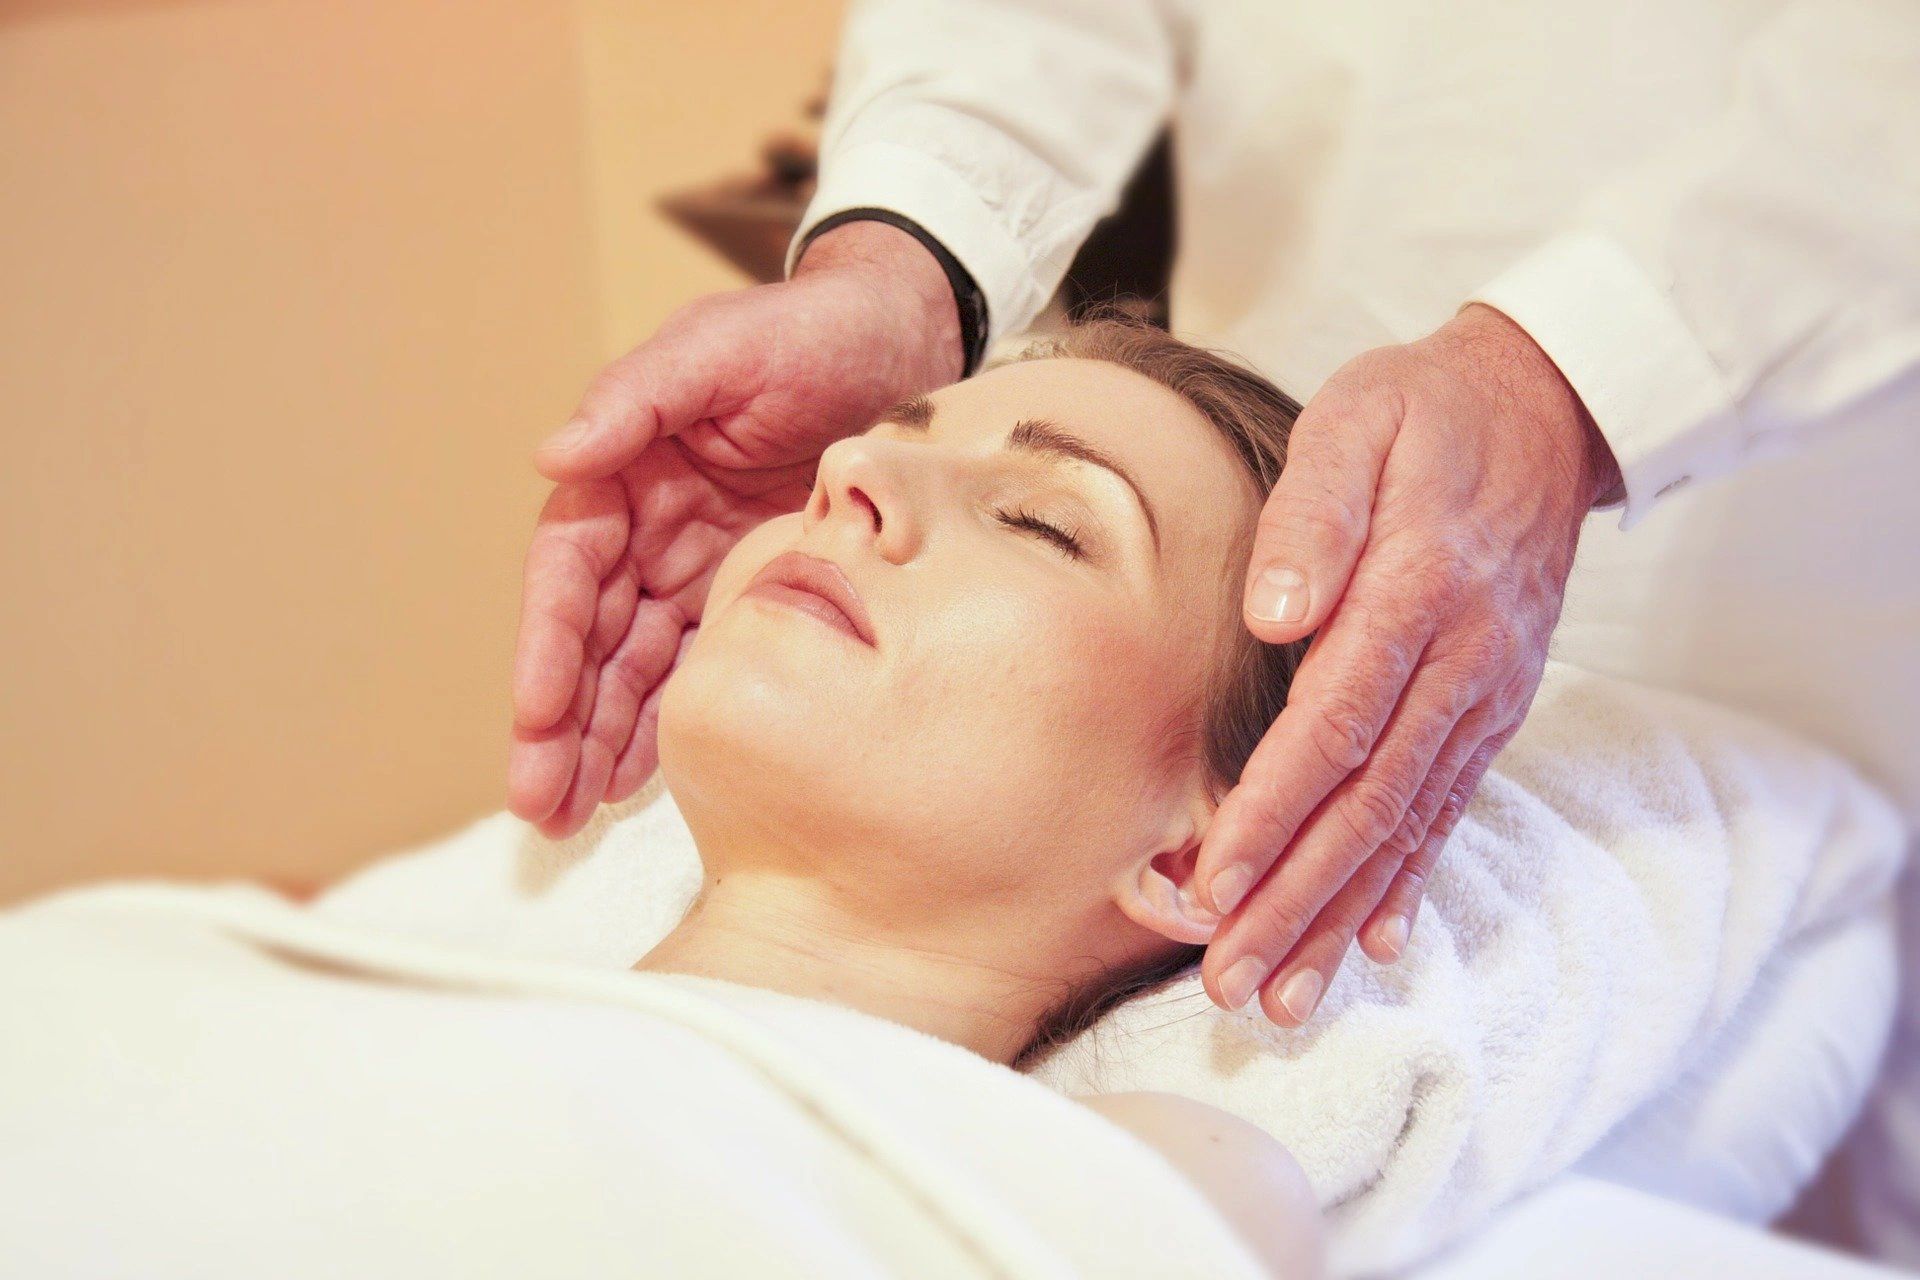 Massage Therapy - What's Best For You?